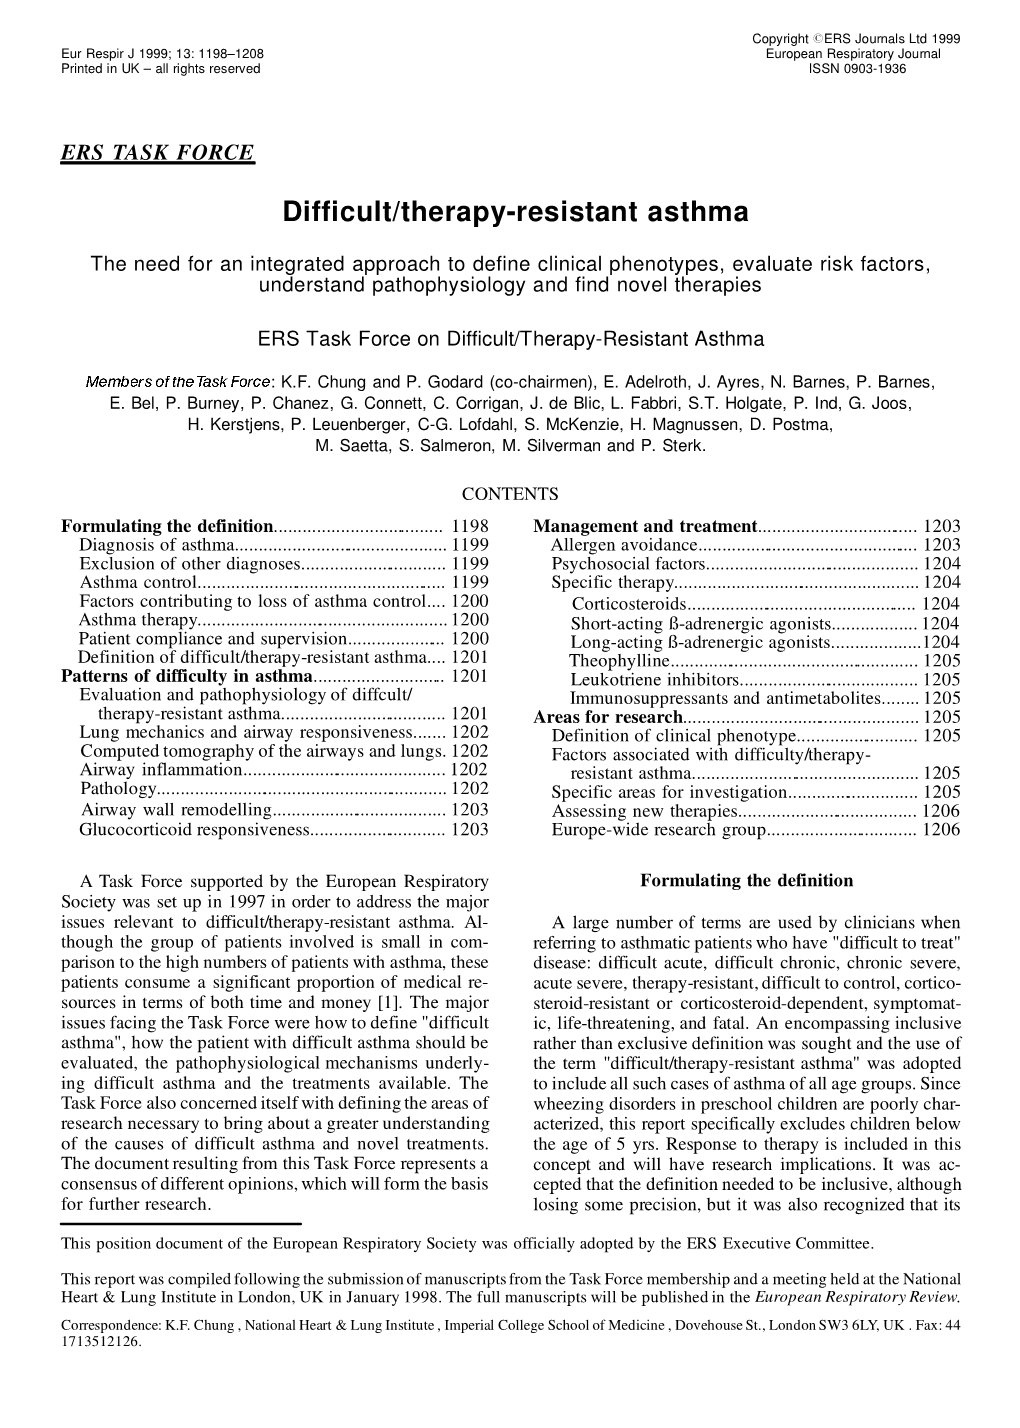 Difficult/Therapy-Resistant Asthma